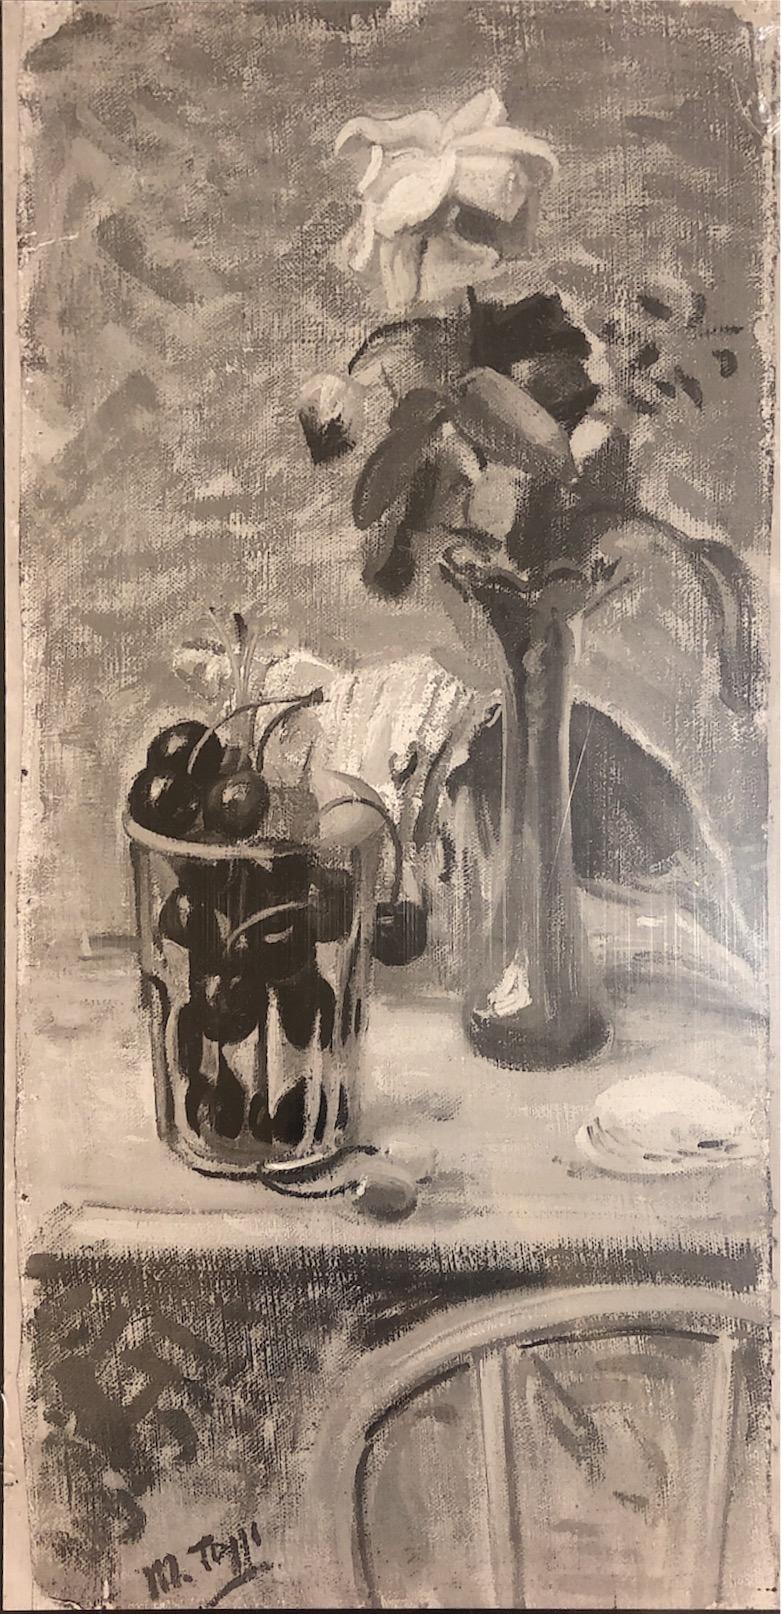 Still life, oil on canvas, painting by Mario Tozzi representing a vase with flowers, a huge shell and a glass filled with cherries. This 1944 painting has been authenticated by the official Archive of Mario Tozzi, (reference Arch.771 - Cat.44/9).